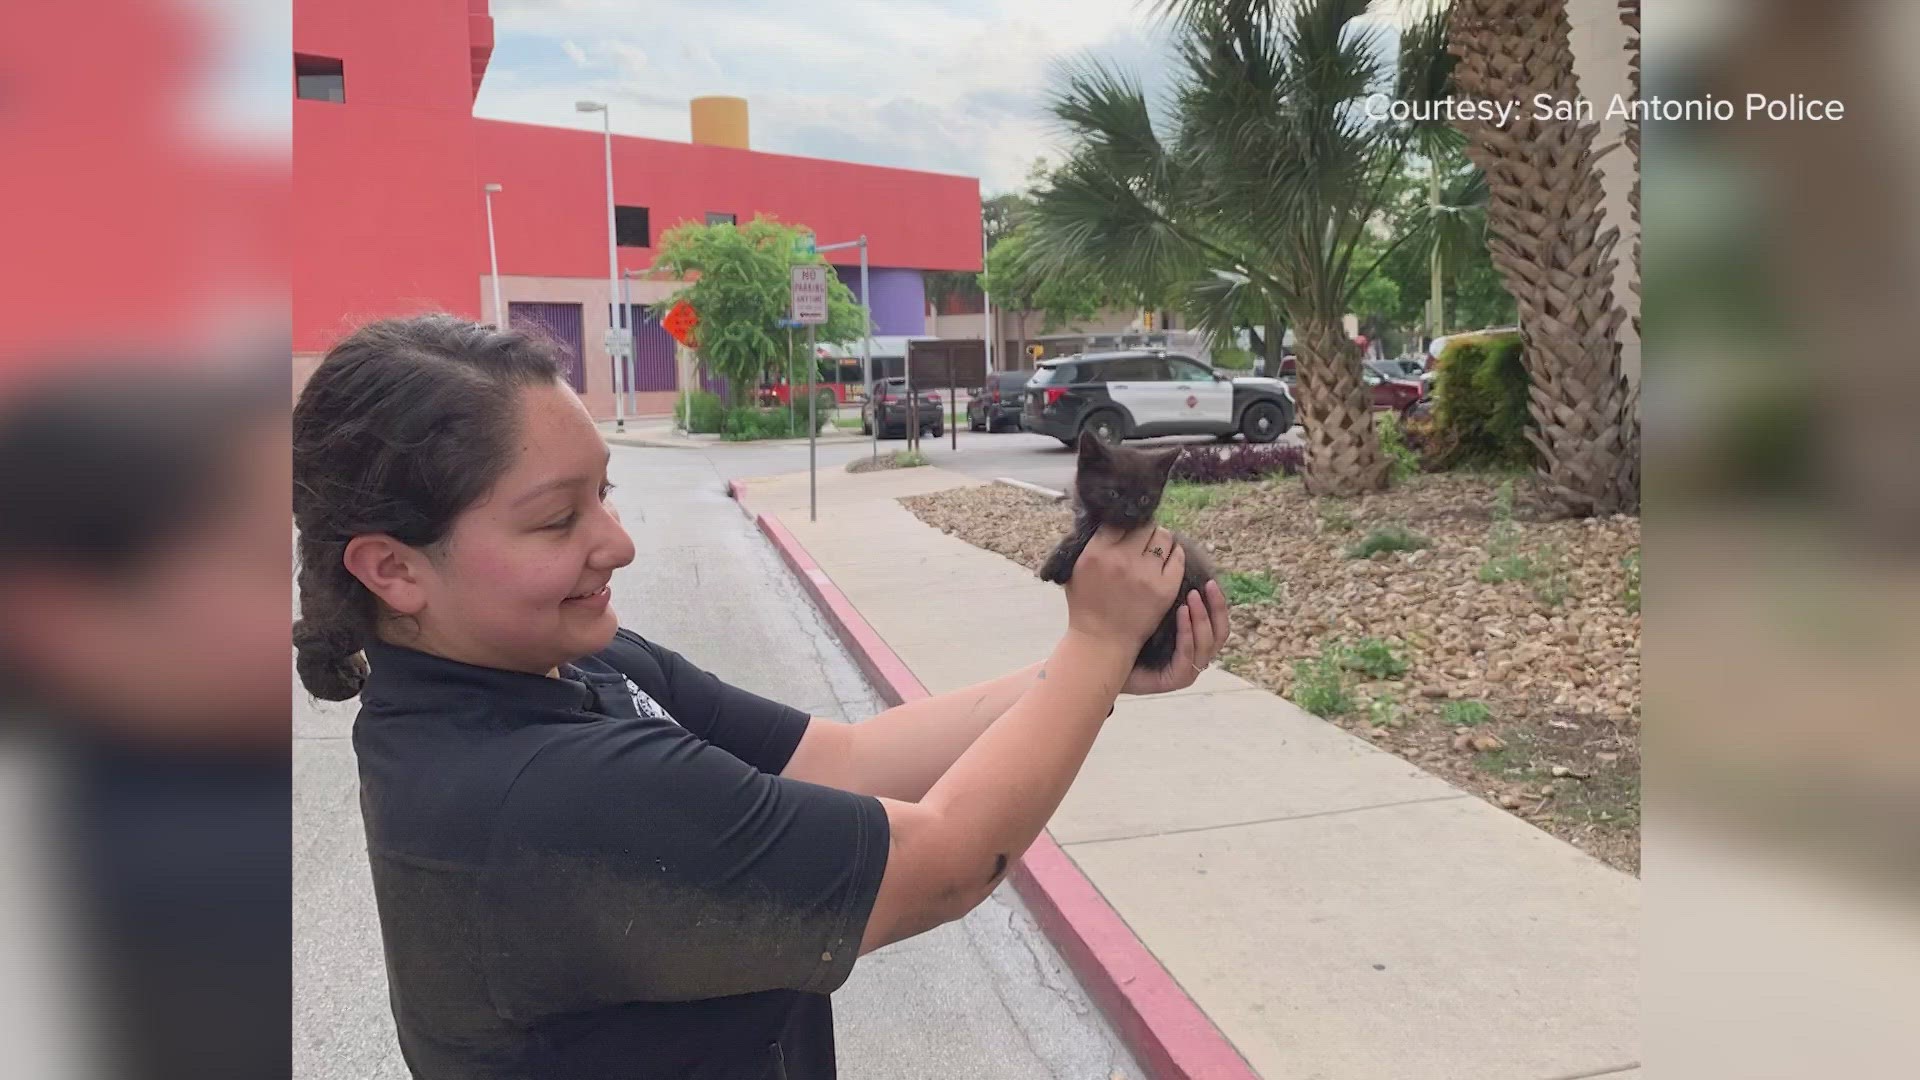 This San Antonio police officer went underneath a car to save a kitten.